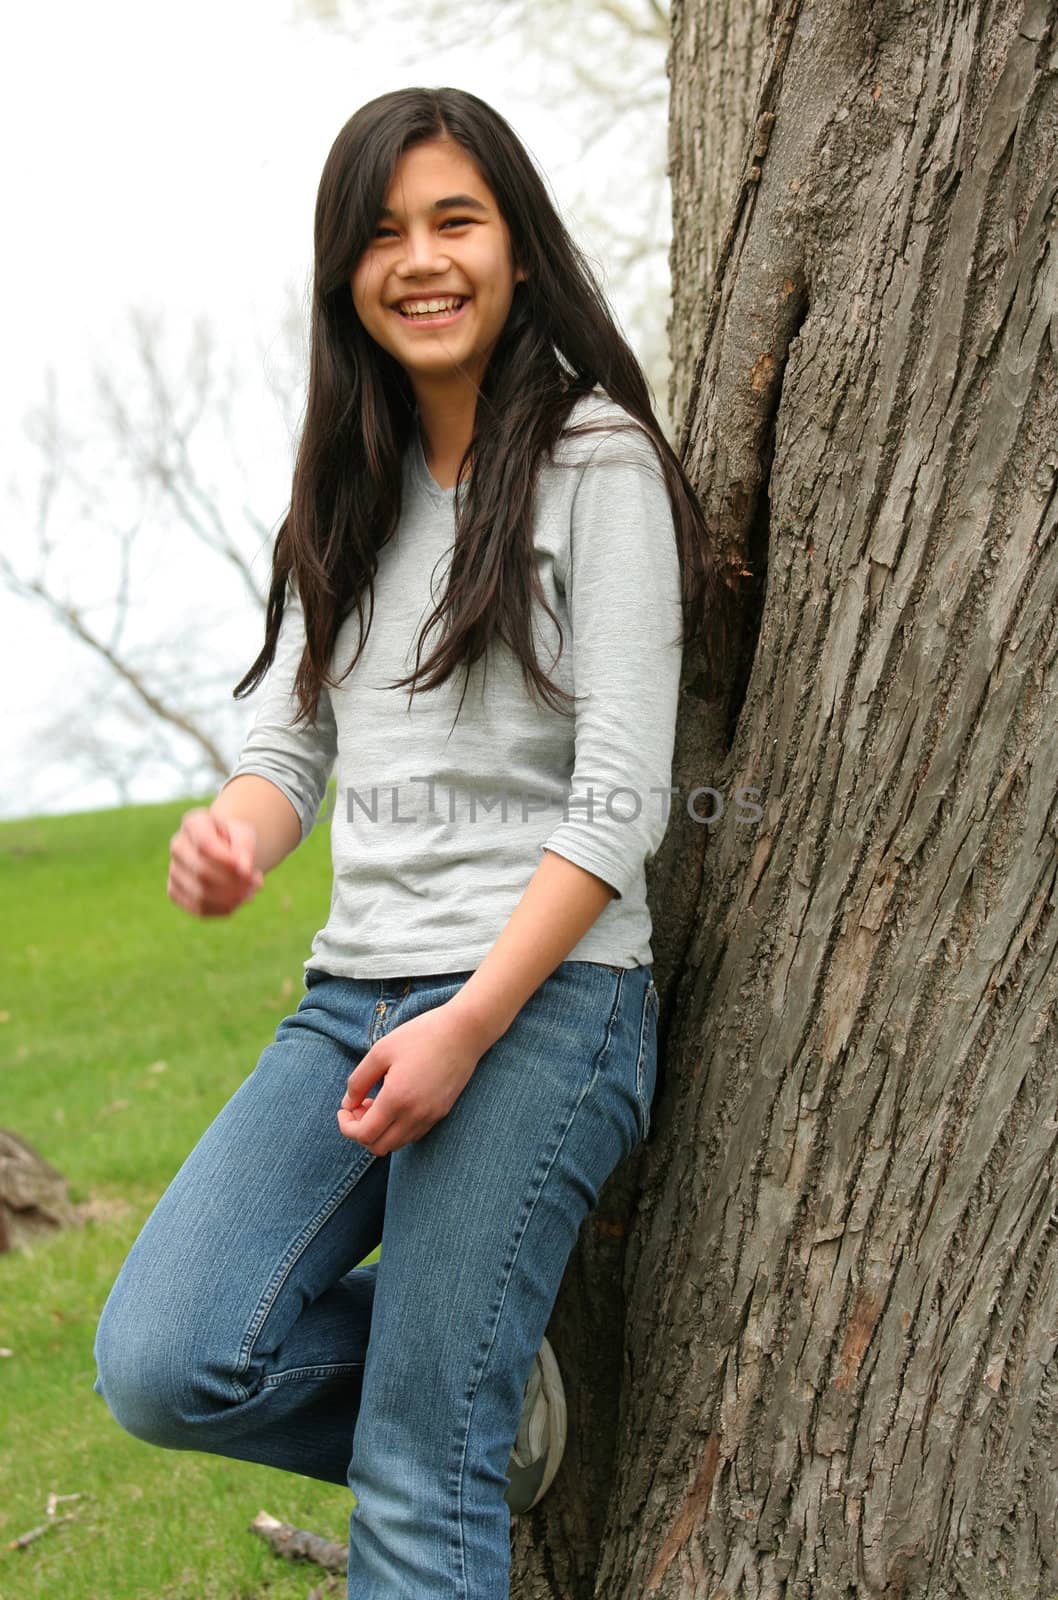 Young teen girl leaning against tree smiling